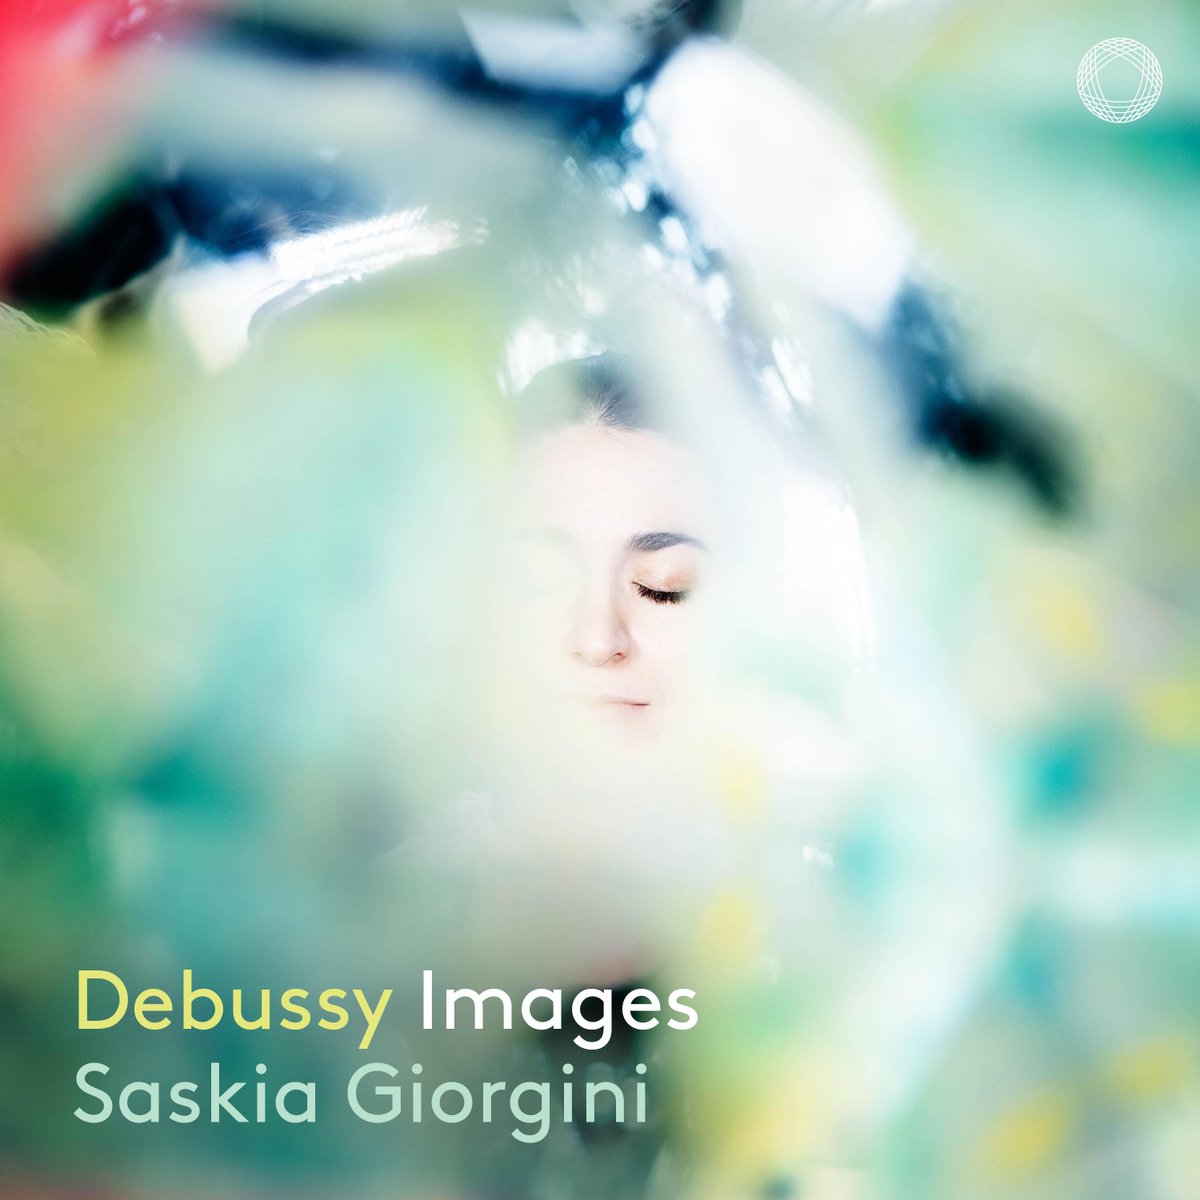 Debussy’s “Pour le Piano, L. 59 II. Sarabande”, from the forthcoming album ‘Debussy: Images’ with Saskia Giorgini, is available now on @AppleMusic, @Spotify, @Qobuz, and more! LISTEN to the available track and PRE-ADD the album now! 🎶lnk.to/DebussyImages 📷: Julia Wesely